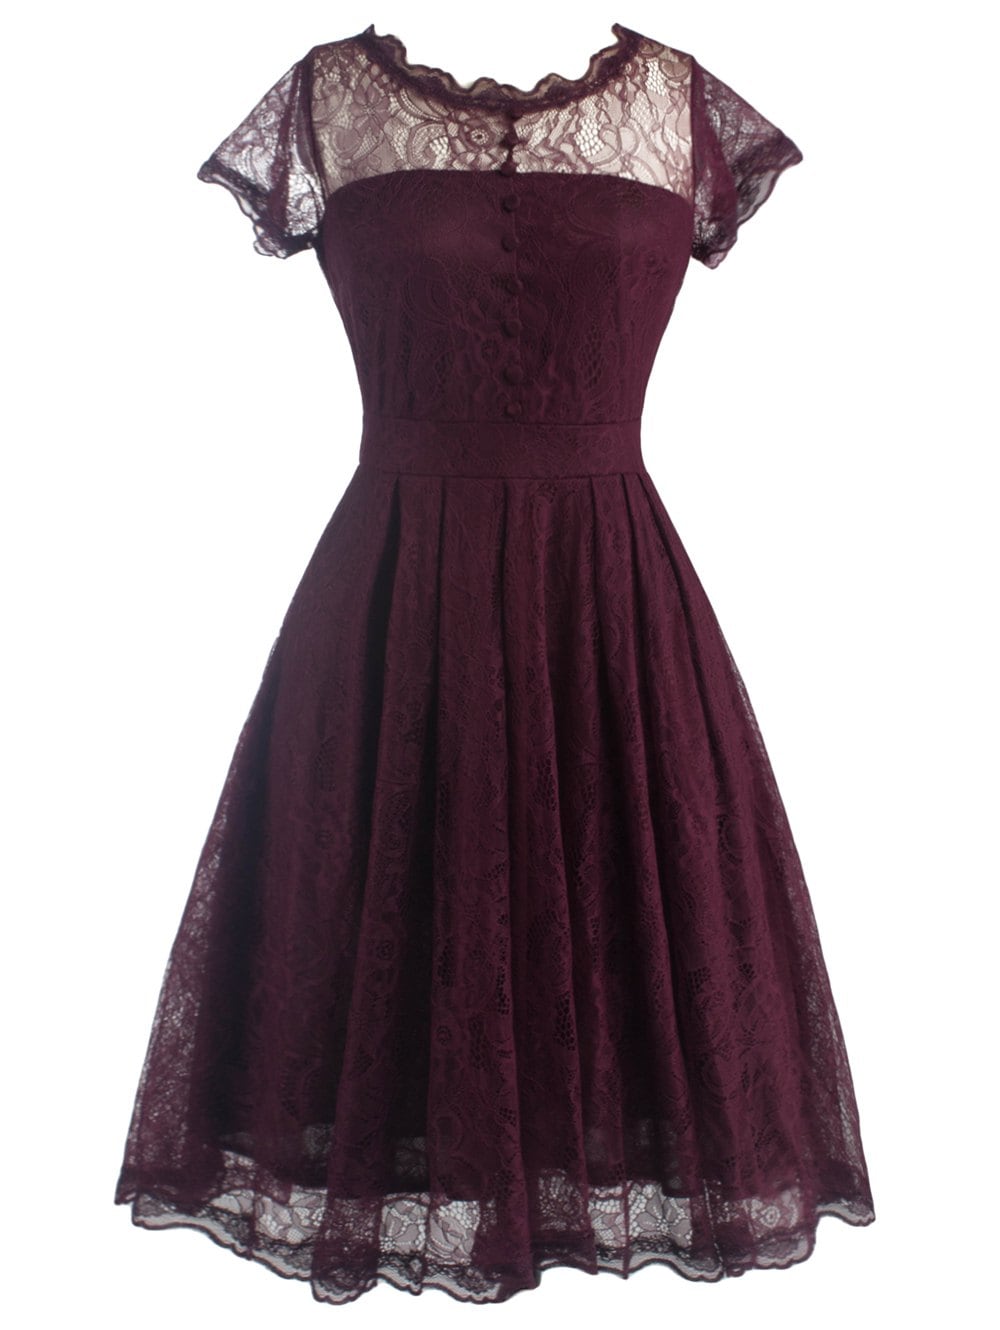 dress for women ... funky short wedding a line dress with sleeves - wine red m ... VKNPGJH